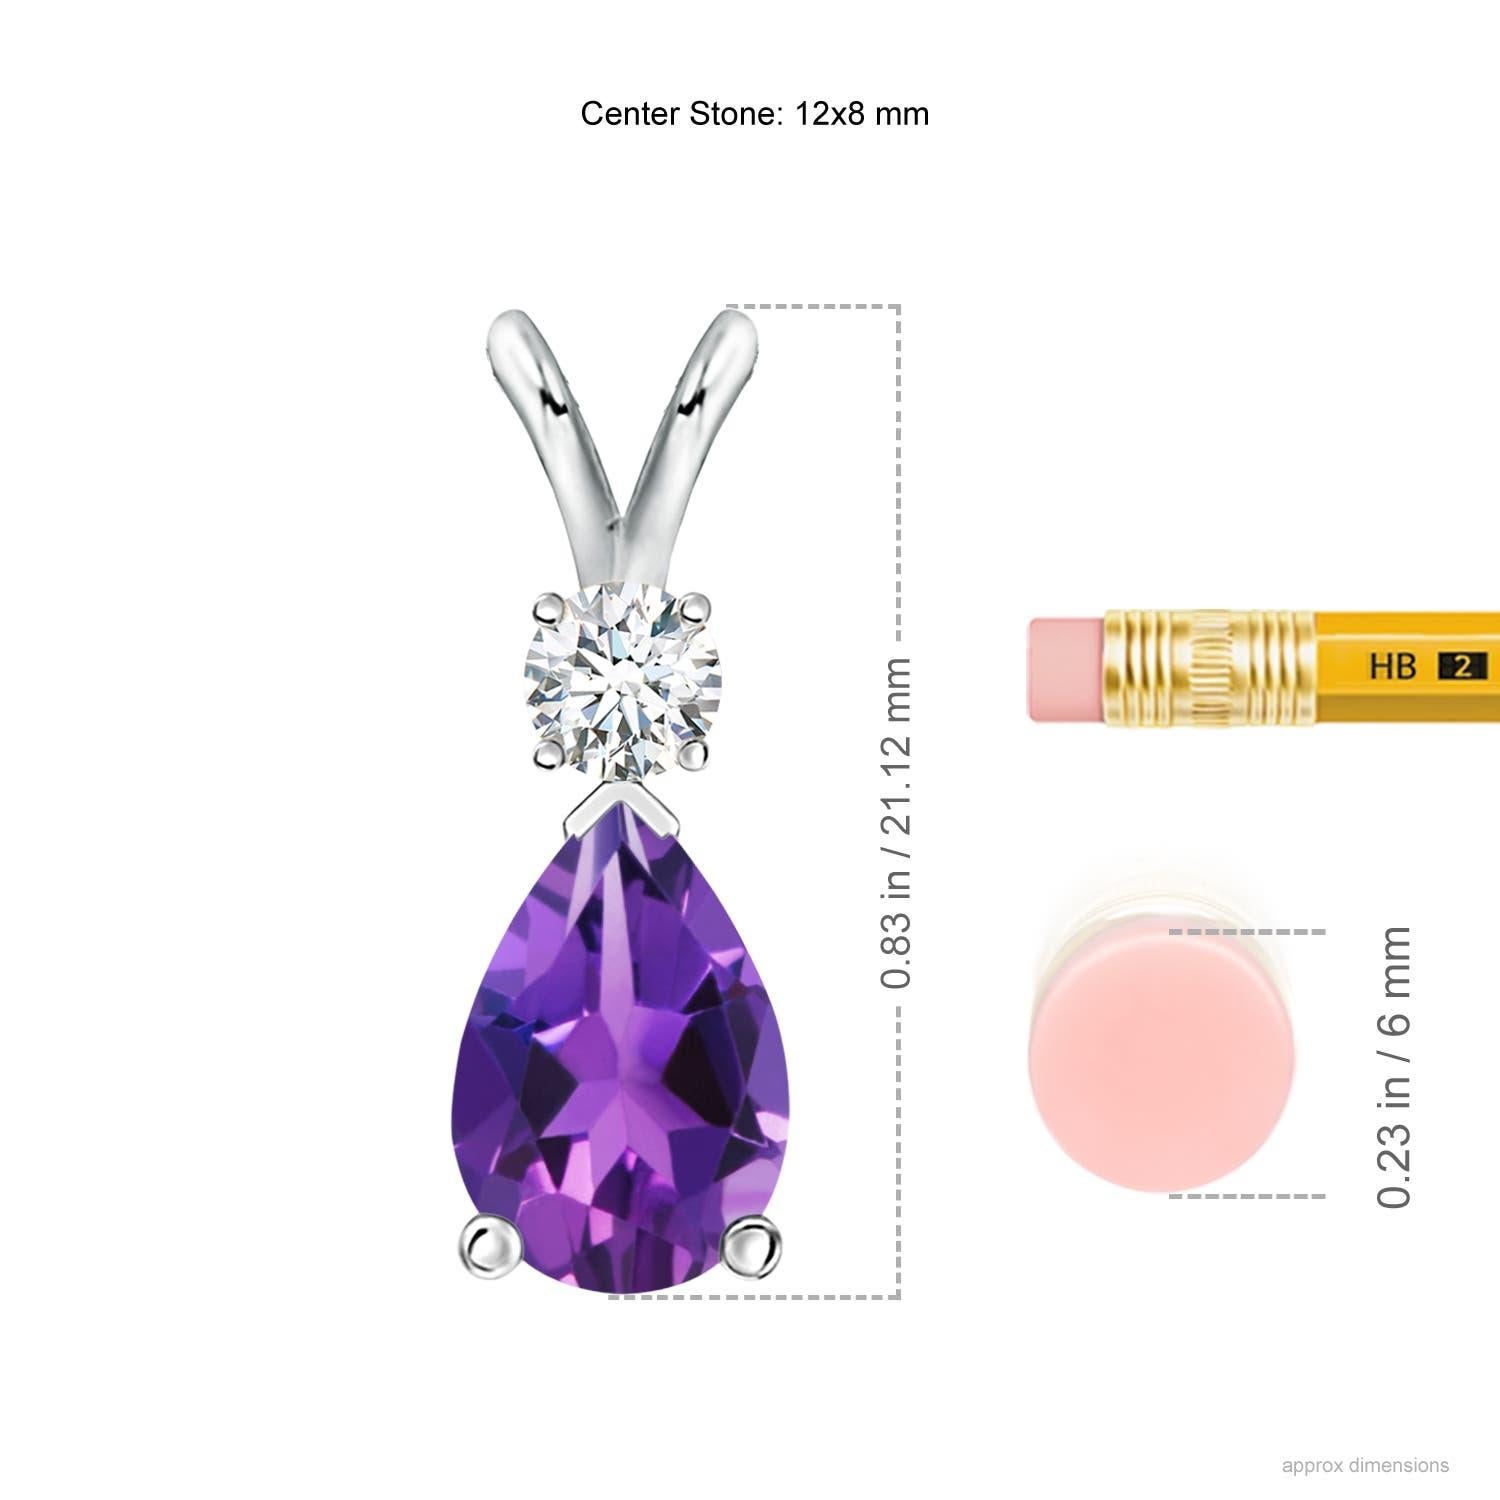 A pear-shaped deep purple amethyst is secured in a prong setting and embellished with a diamond accent on the top. Simple yet stunning, this teardrop amethyst pendant with V bale is sculpted in silver.